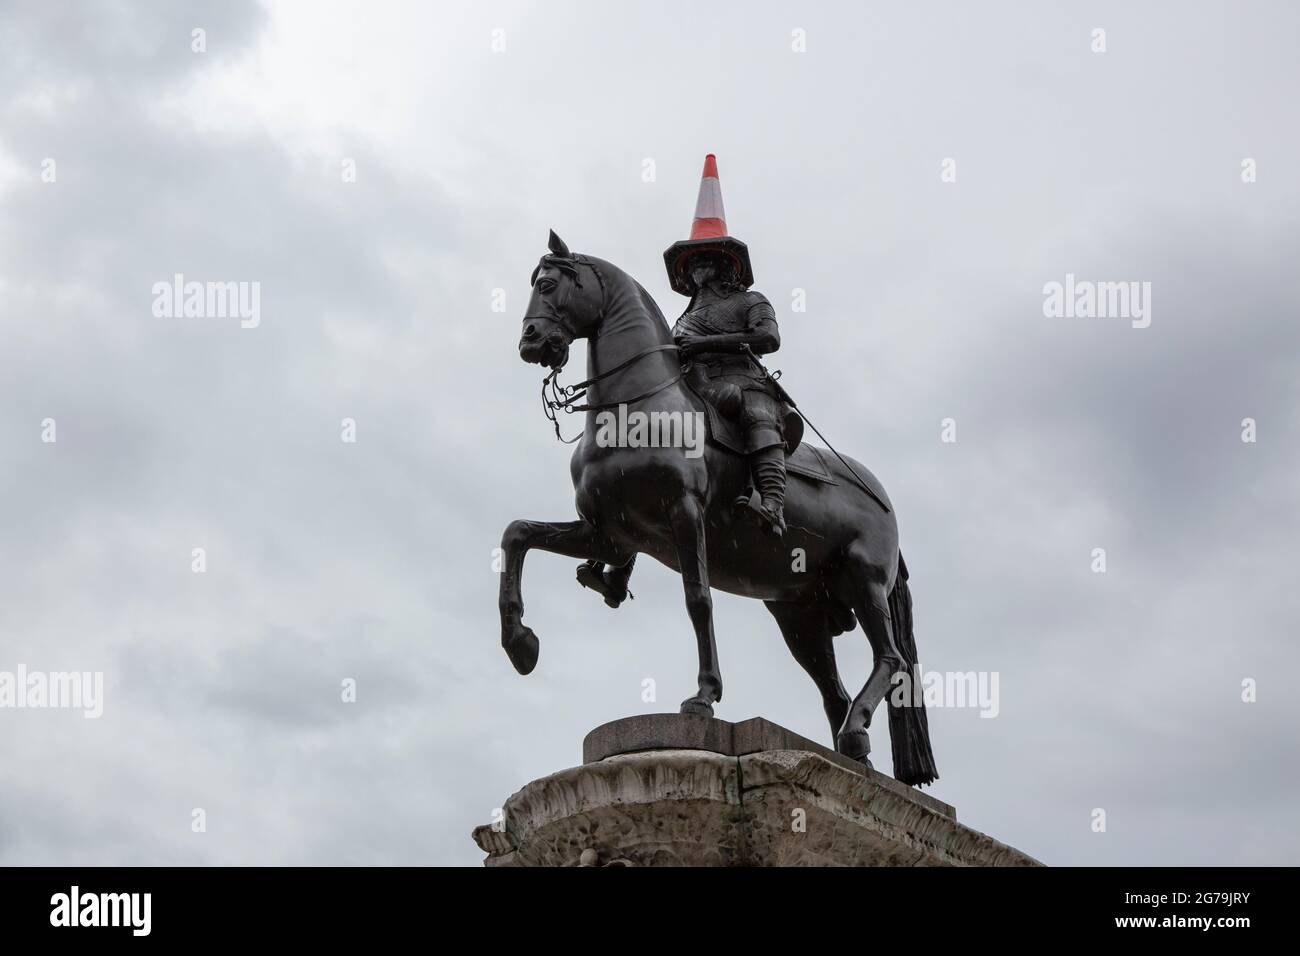 Euro 2020 Final England vs. Italy --- A statue of Charles I wearing a traffic cone. Stock Photo